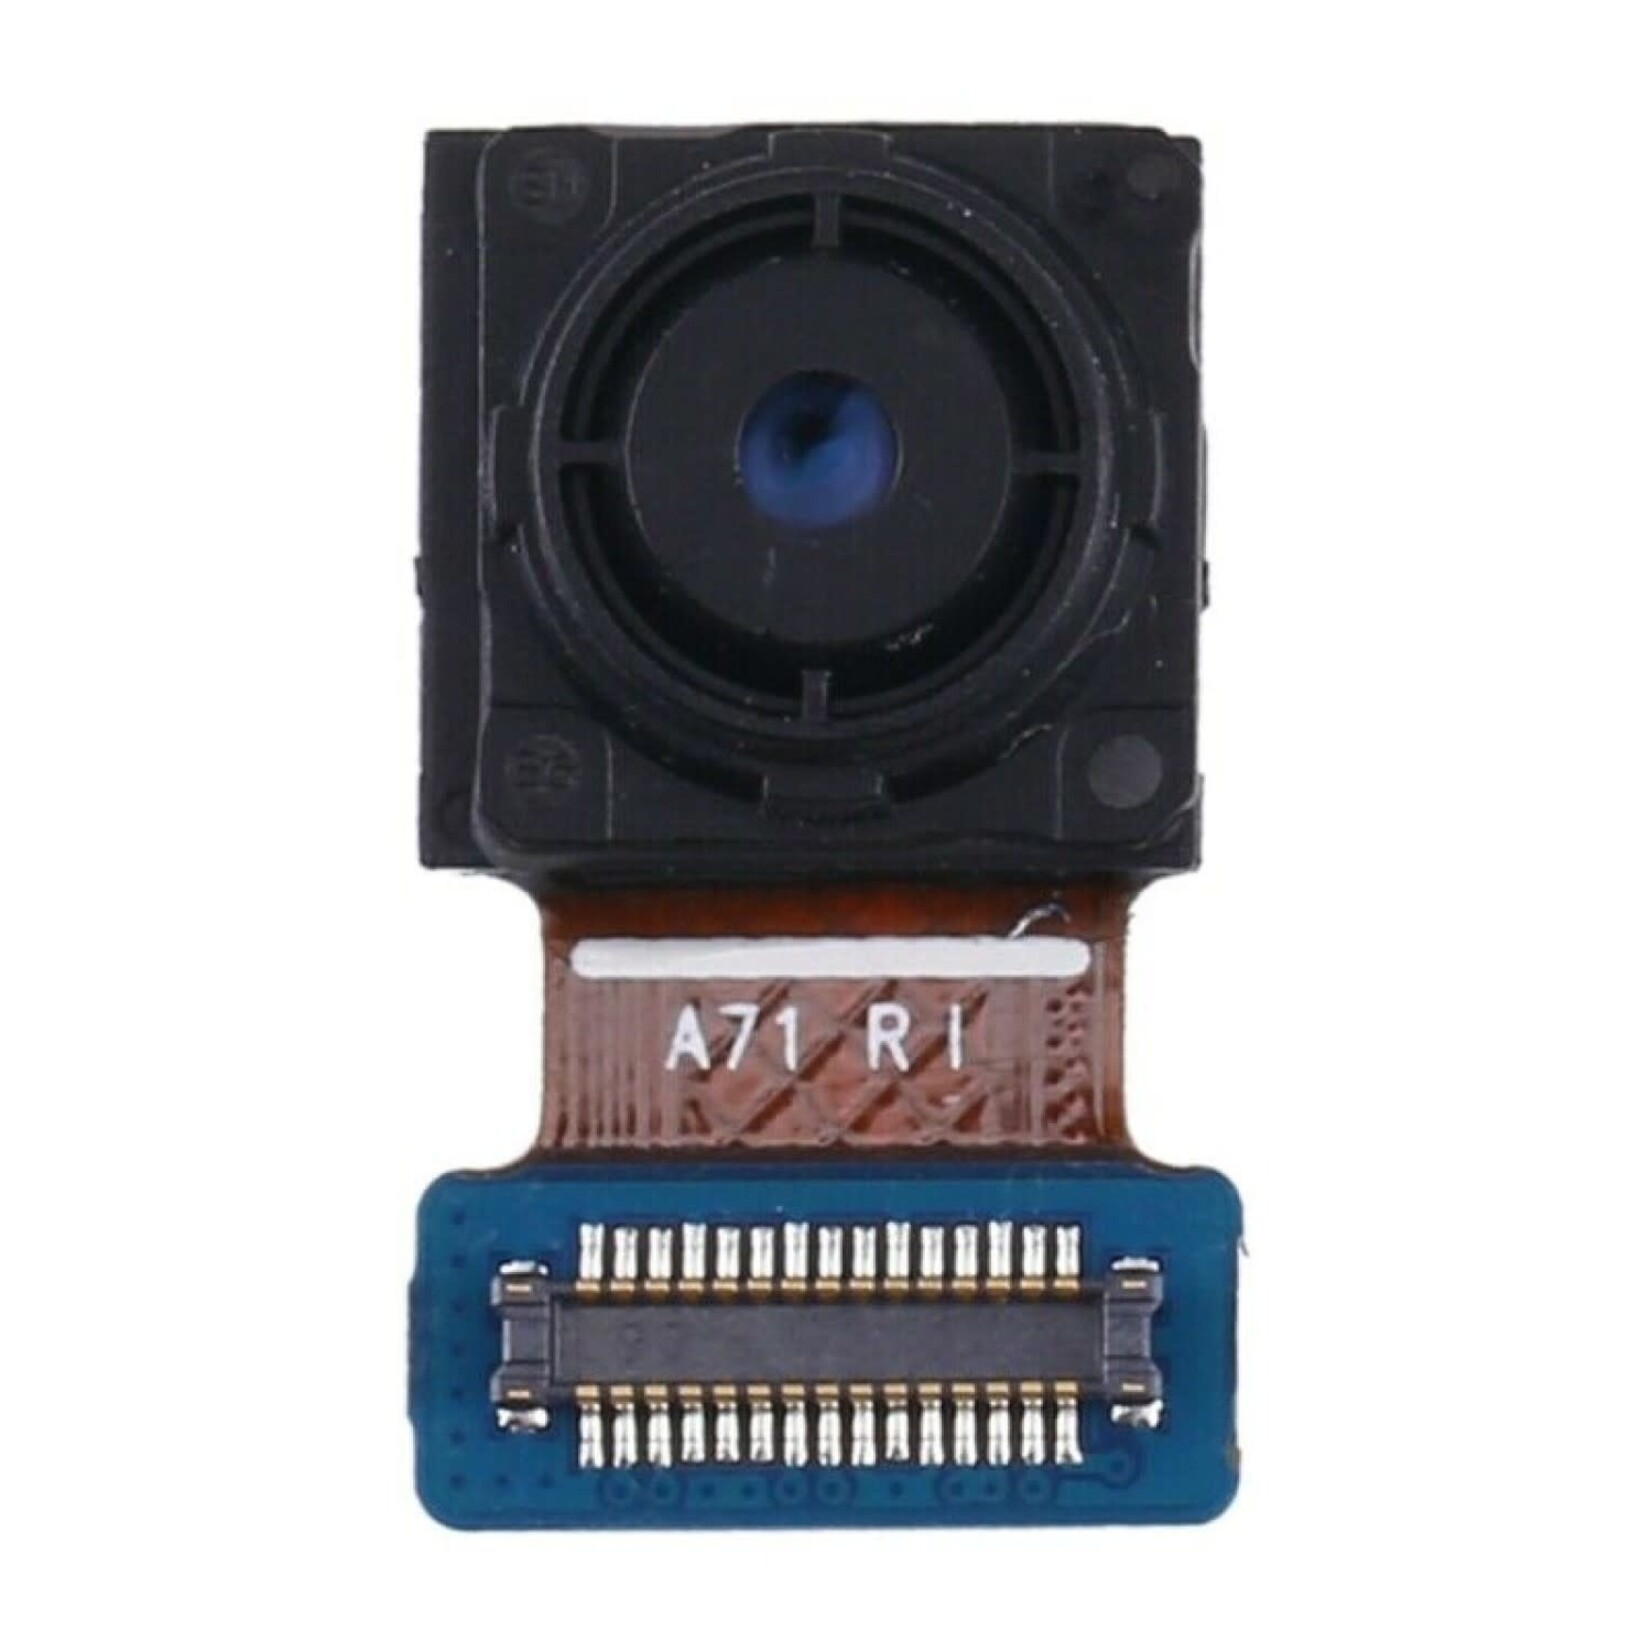 Samsung front camera for Samsung Galaxy A71 2020 A715 A715F